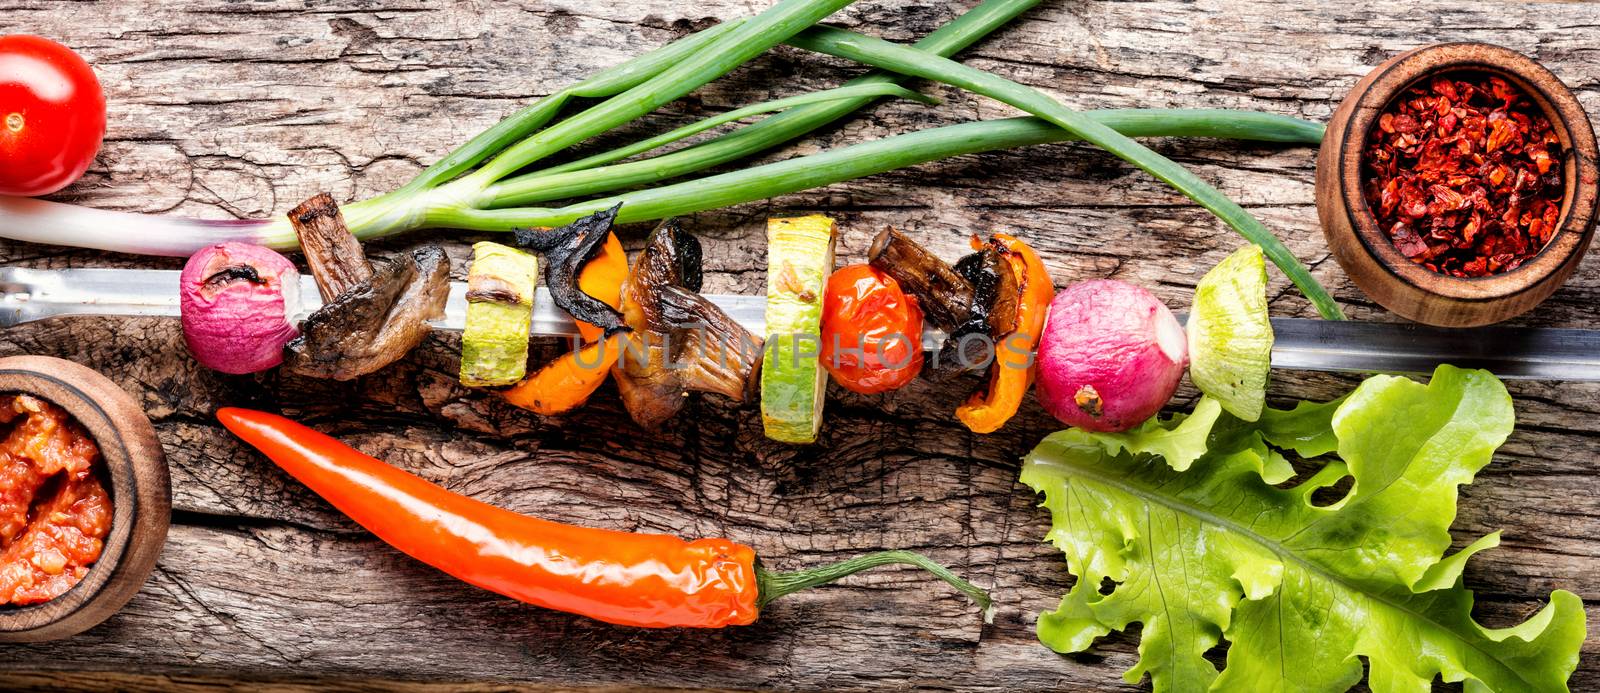 Grilled vegetable shish kebab with peppers, mushrooms, and onions